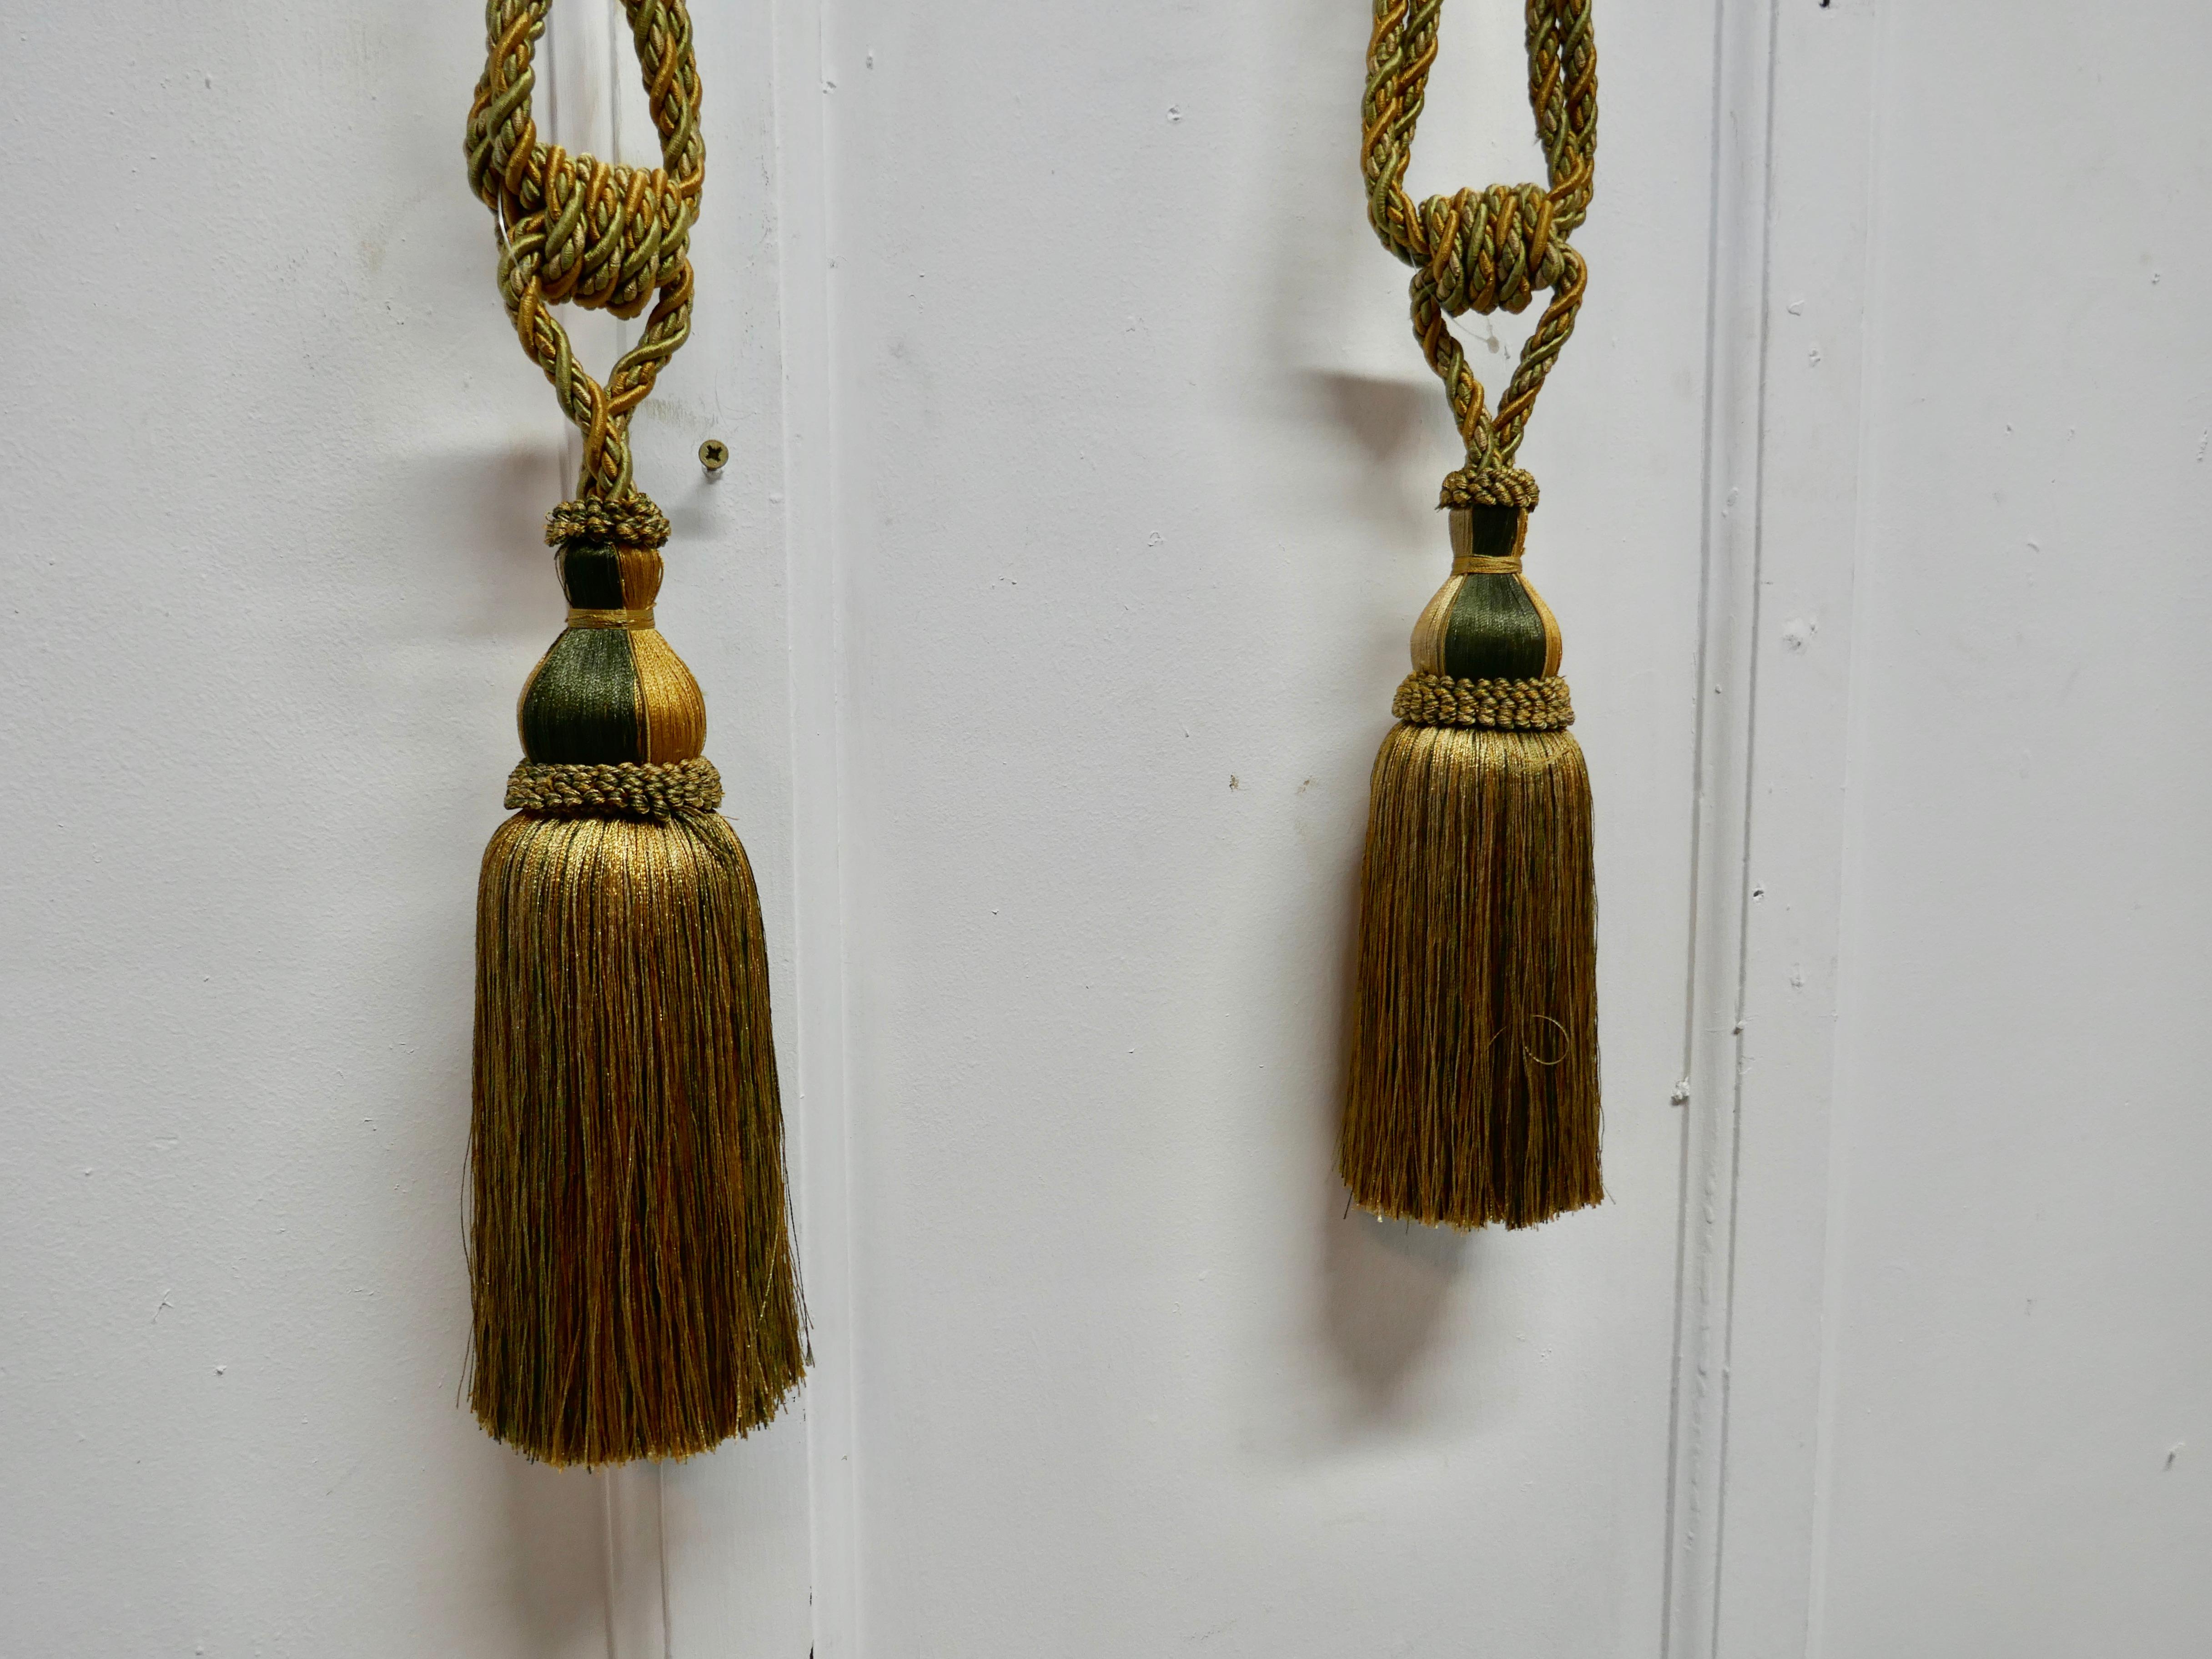 A beautiful pair of large French gold silk handmade tassels, Passementerie curtain tiebacks

Stunning pair of large 19th century French tiebacks, woven in gold silk with a hint of green and brown

The tassels are in good used condition, they are